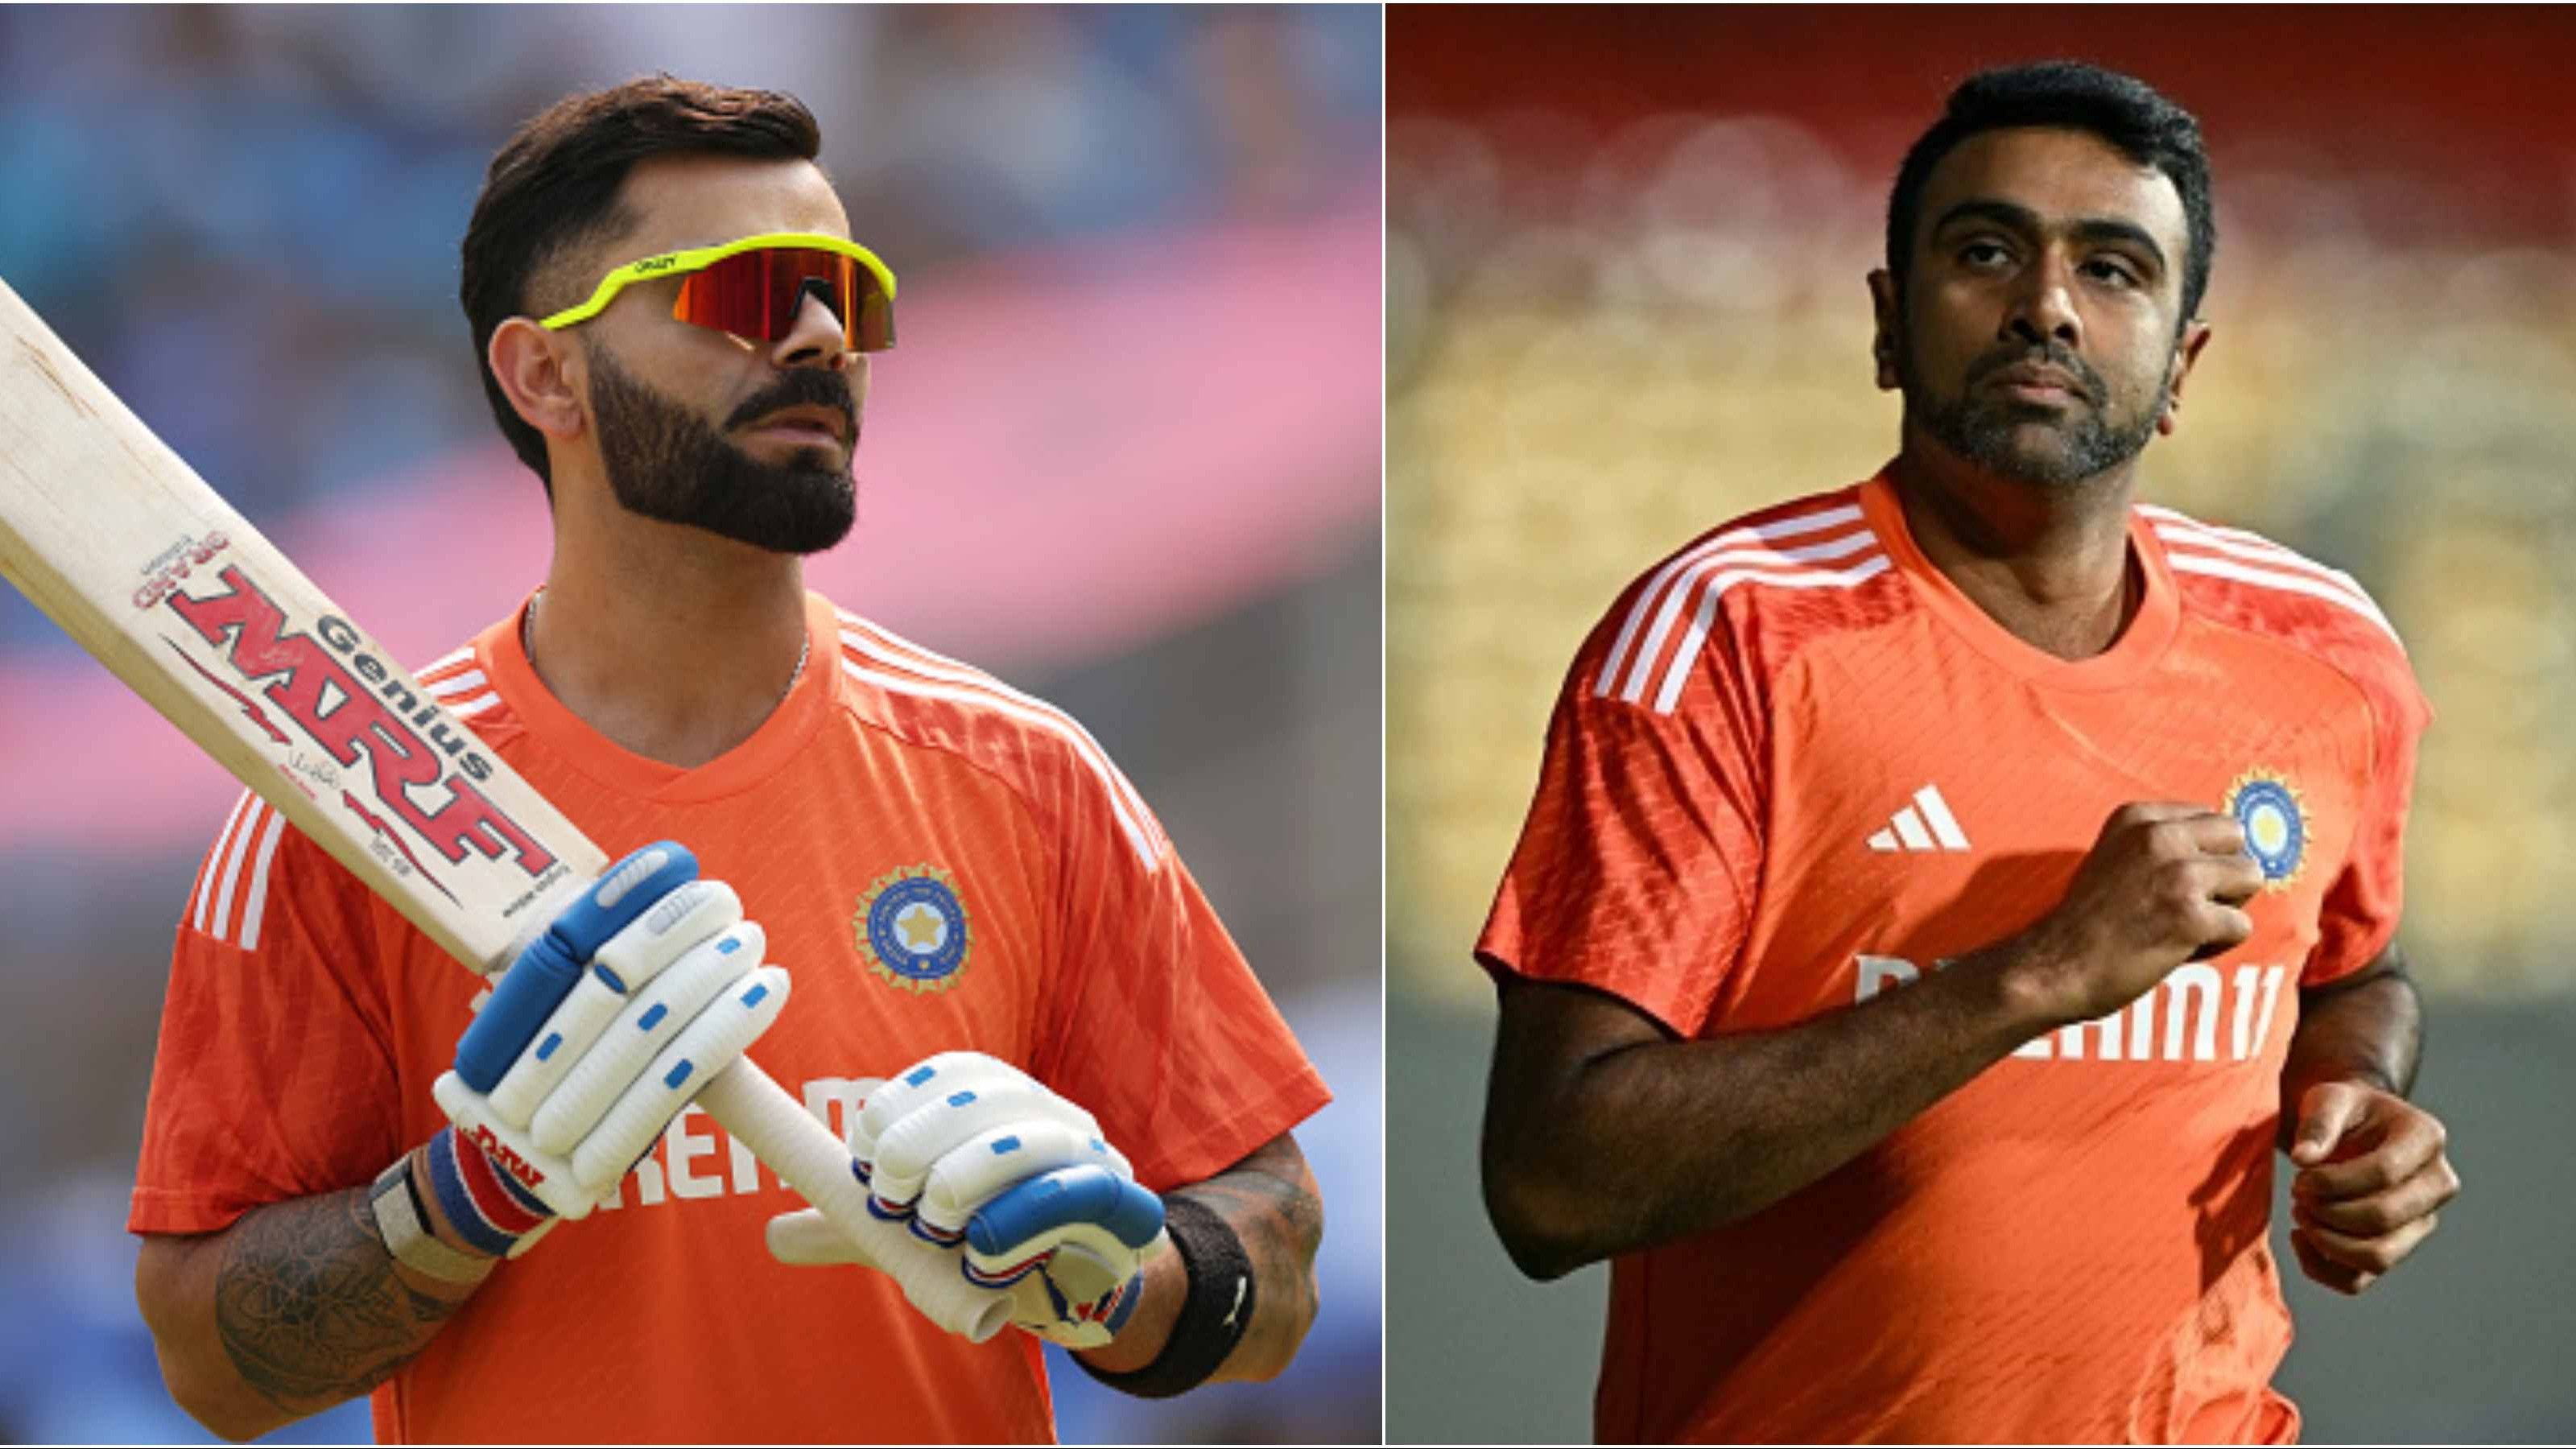 “I could never be a Virat Kohli, something I've made peace with”: R Ashwin on him not being naturally athletic